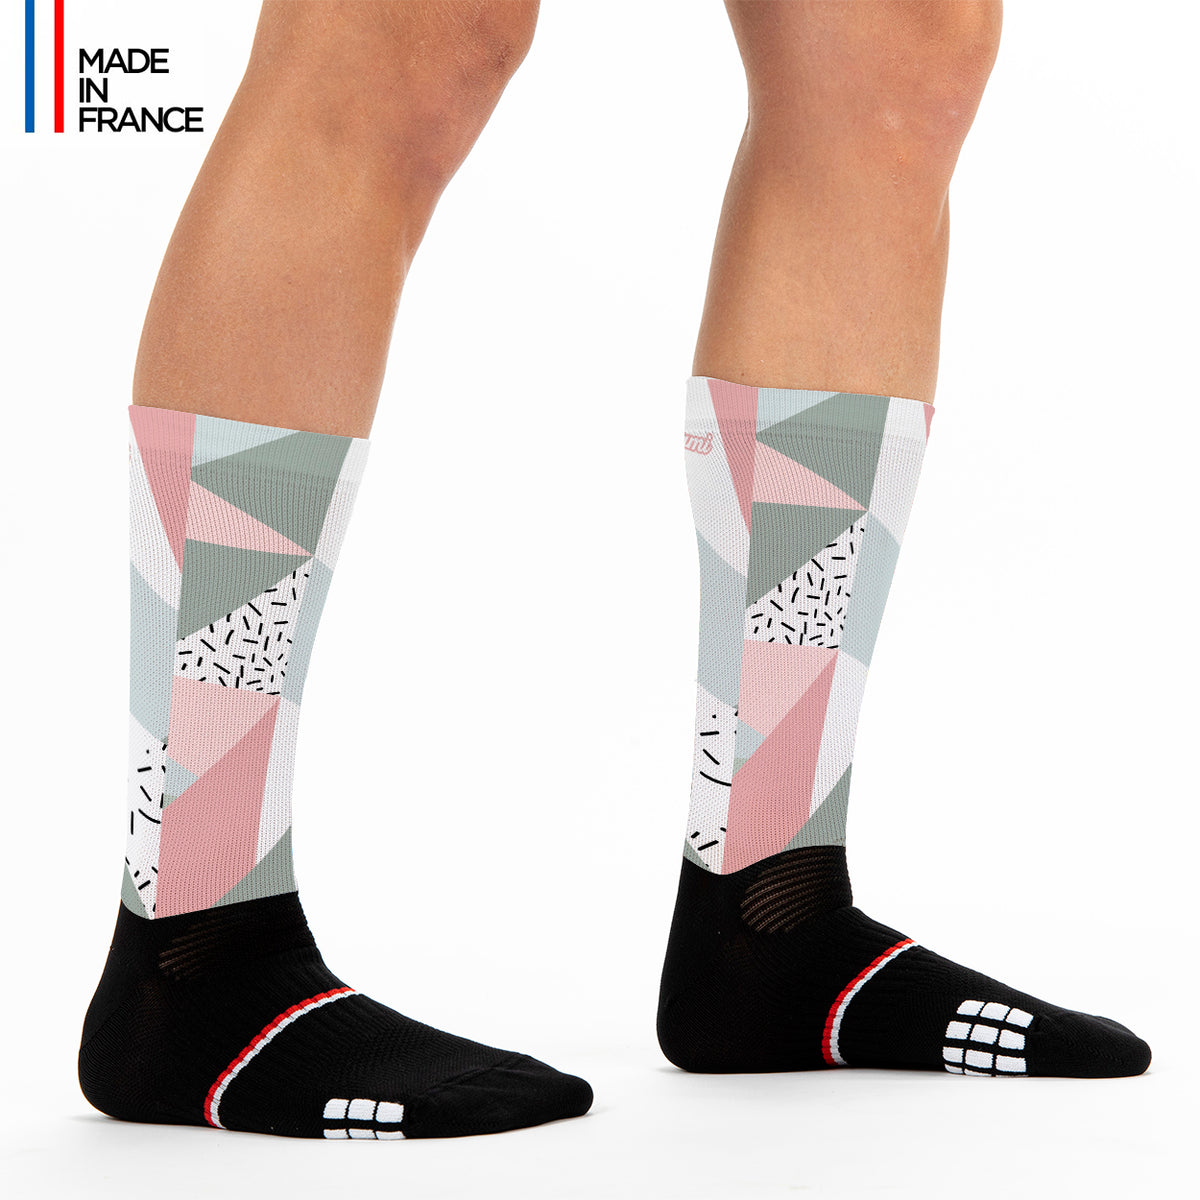 Chaussettes_sports_running_cycling_made_in_france_kiwami_sports